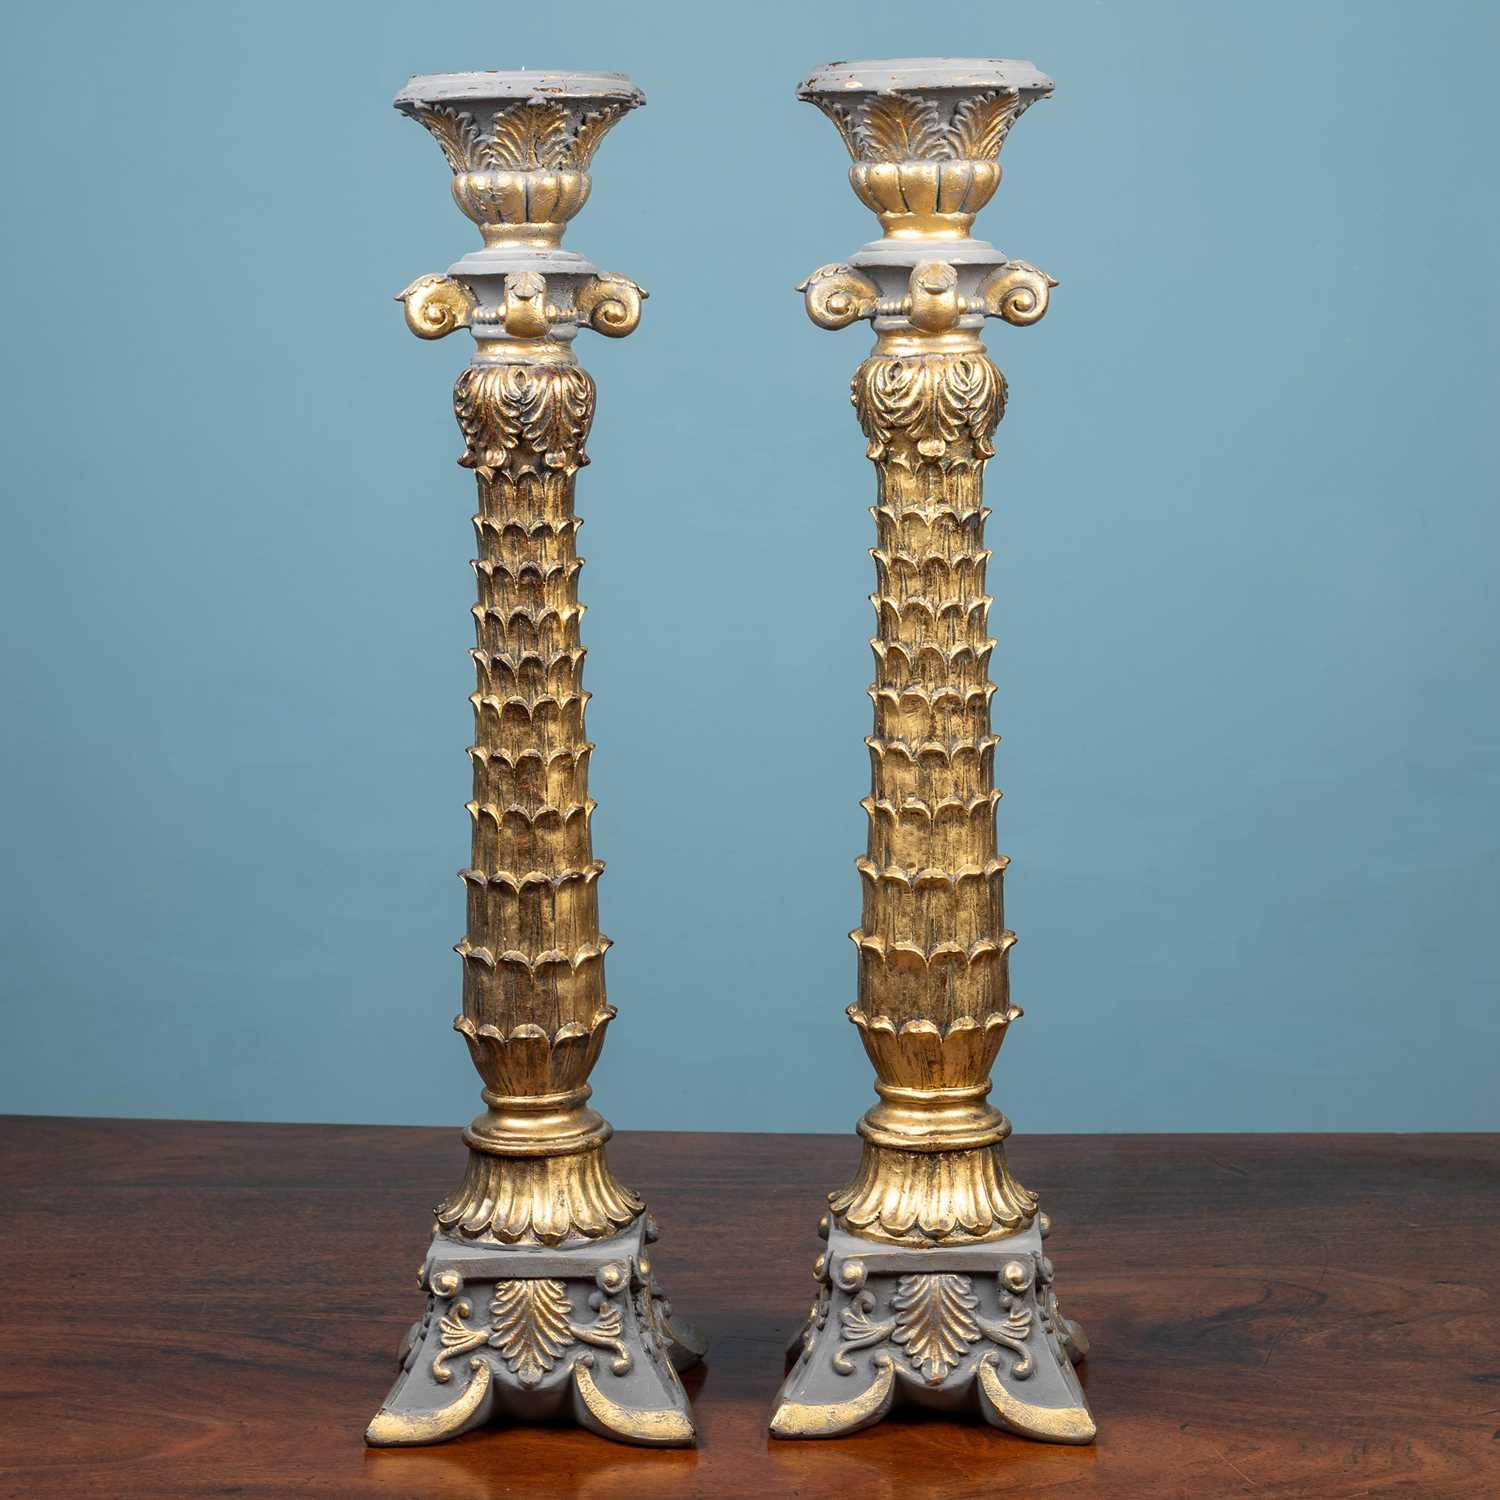 Lot 63 - A pair of tall ornately carved gilt candlestick holders